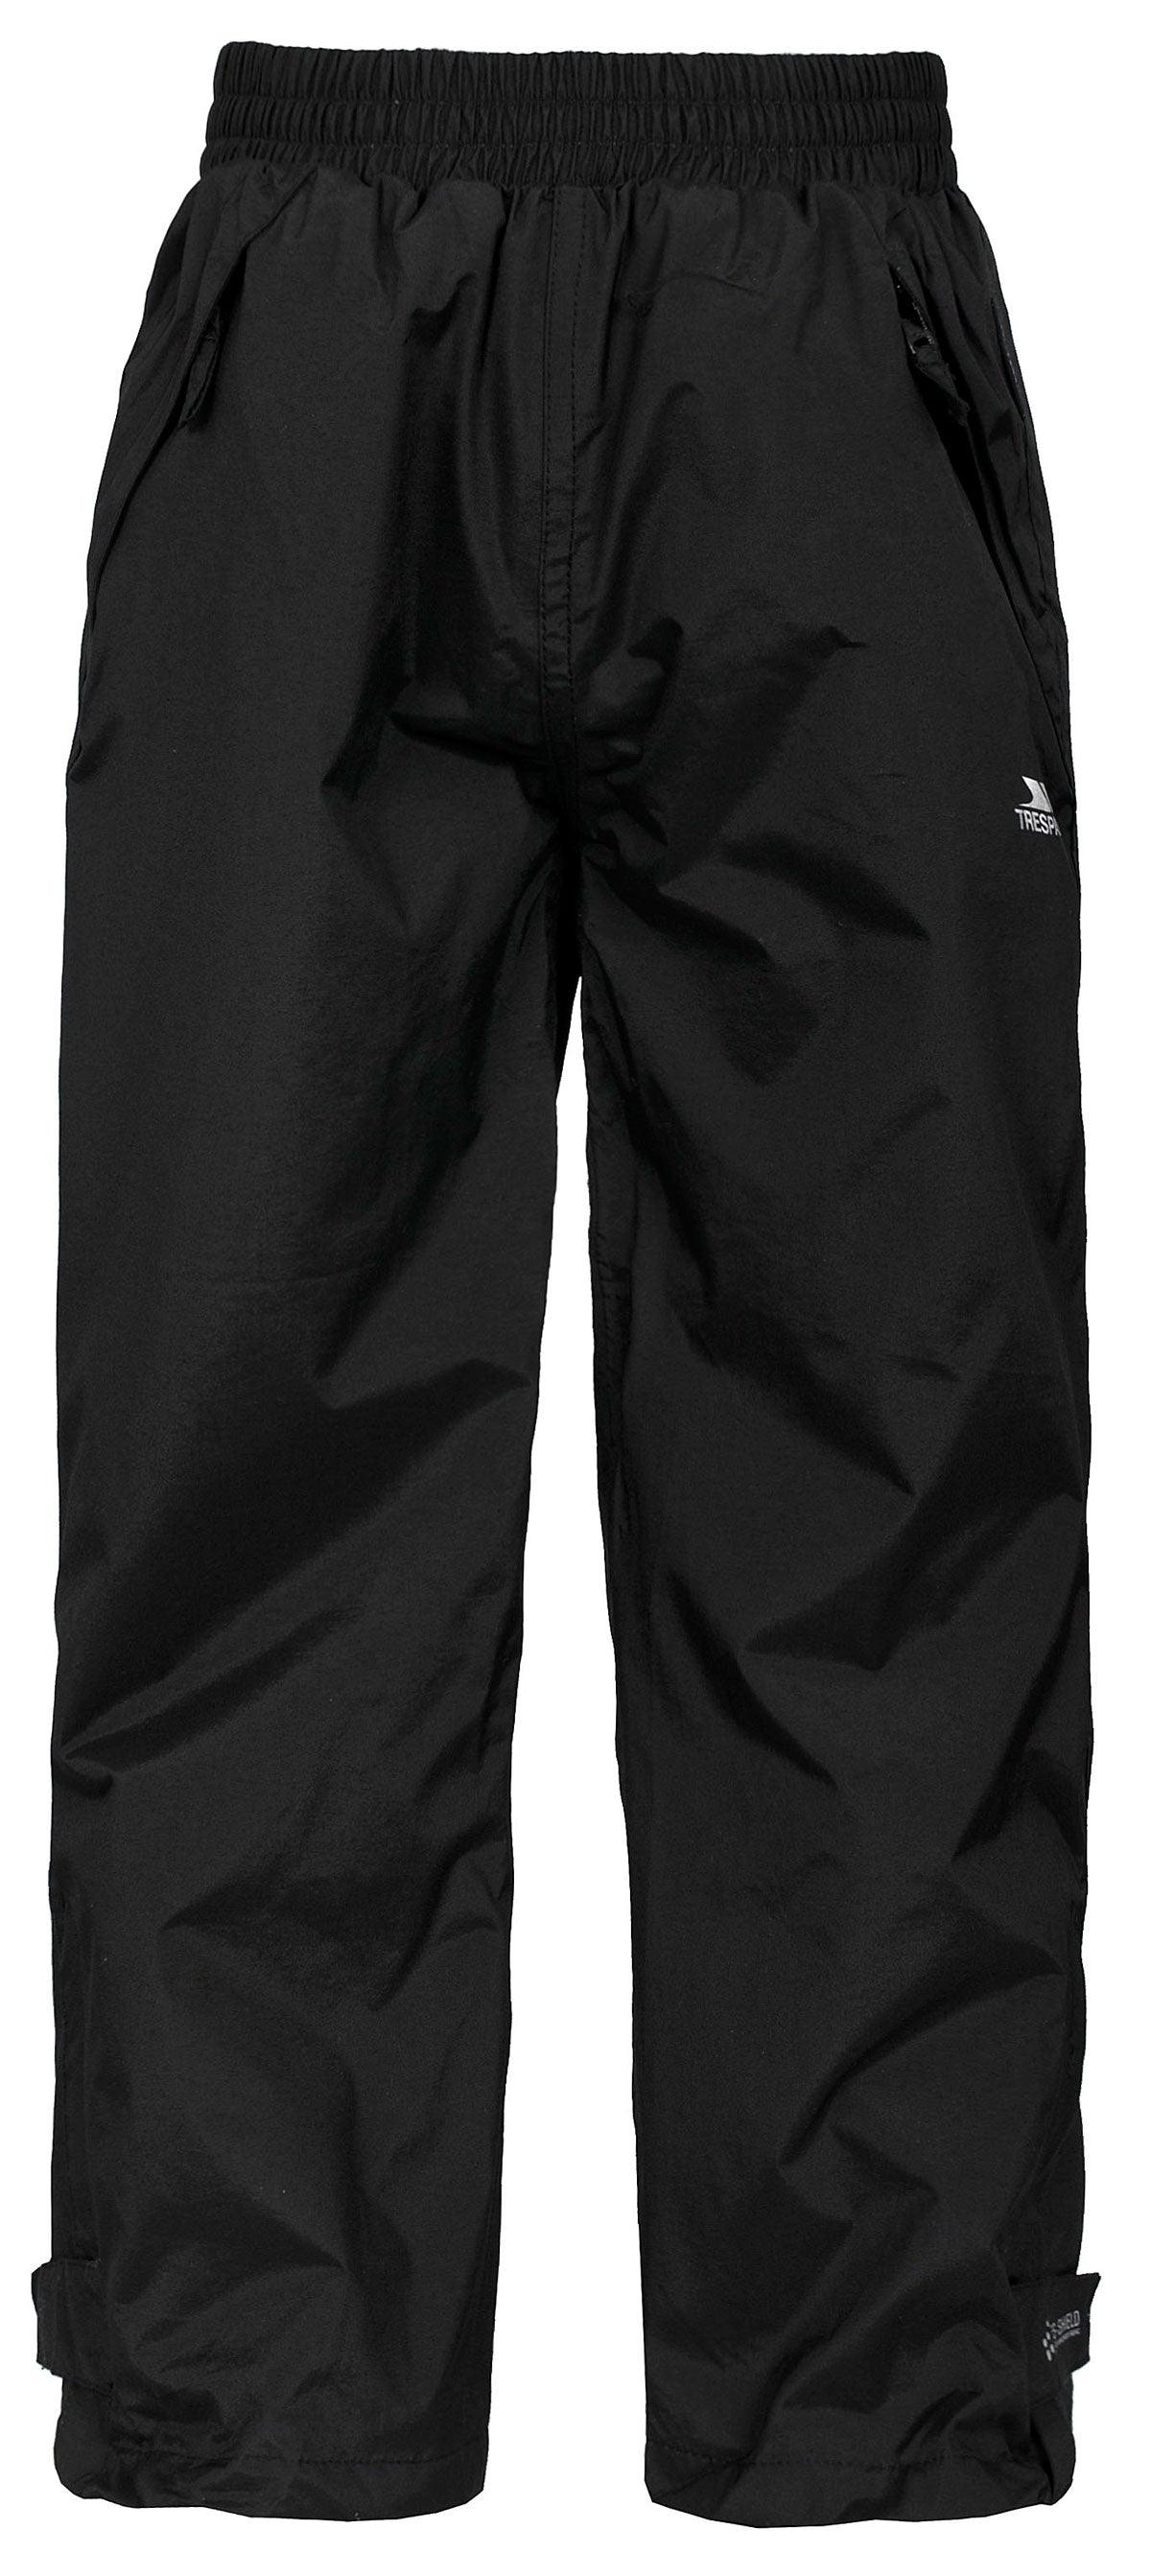 Our Top 5 Walking Shorts